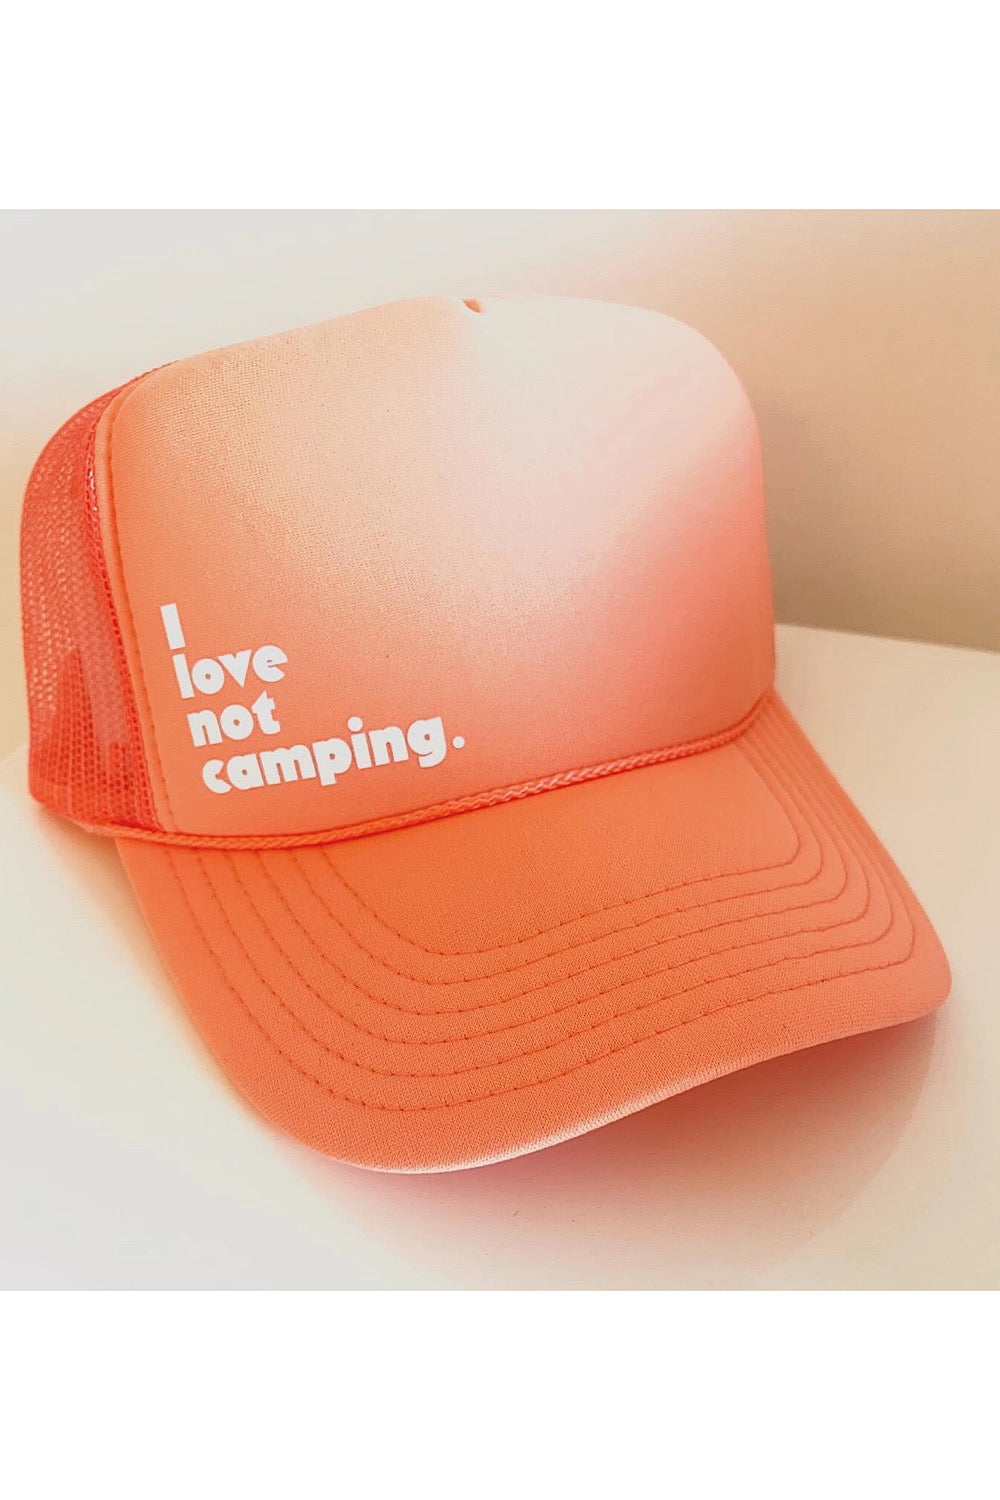 I LOVE NOT CAMPING CORAL TRUCKER HAT